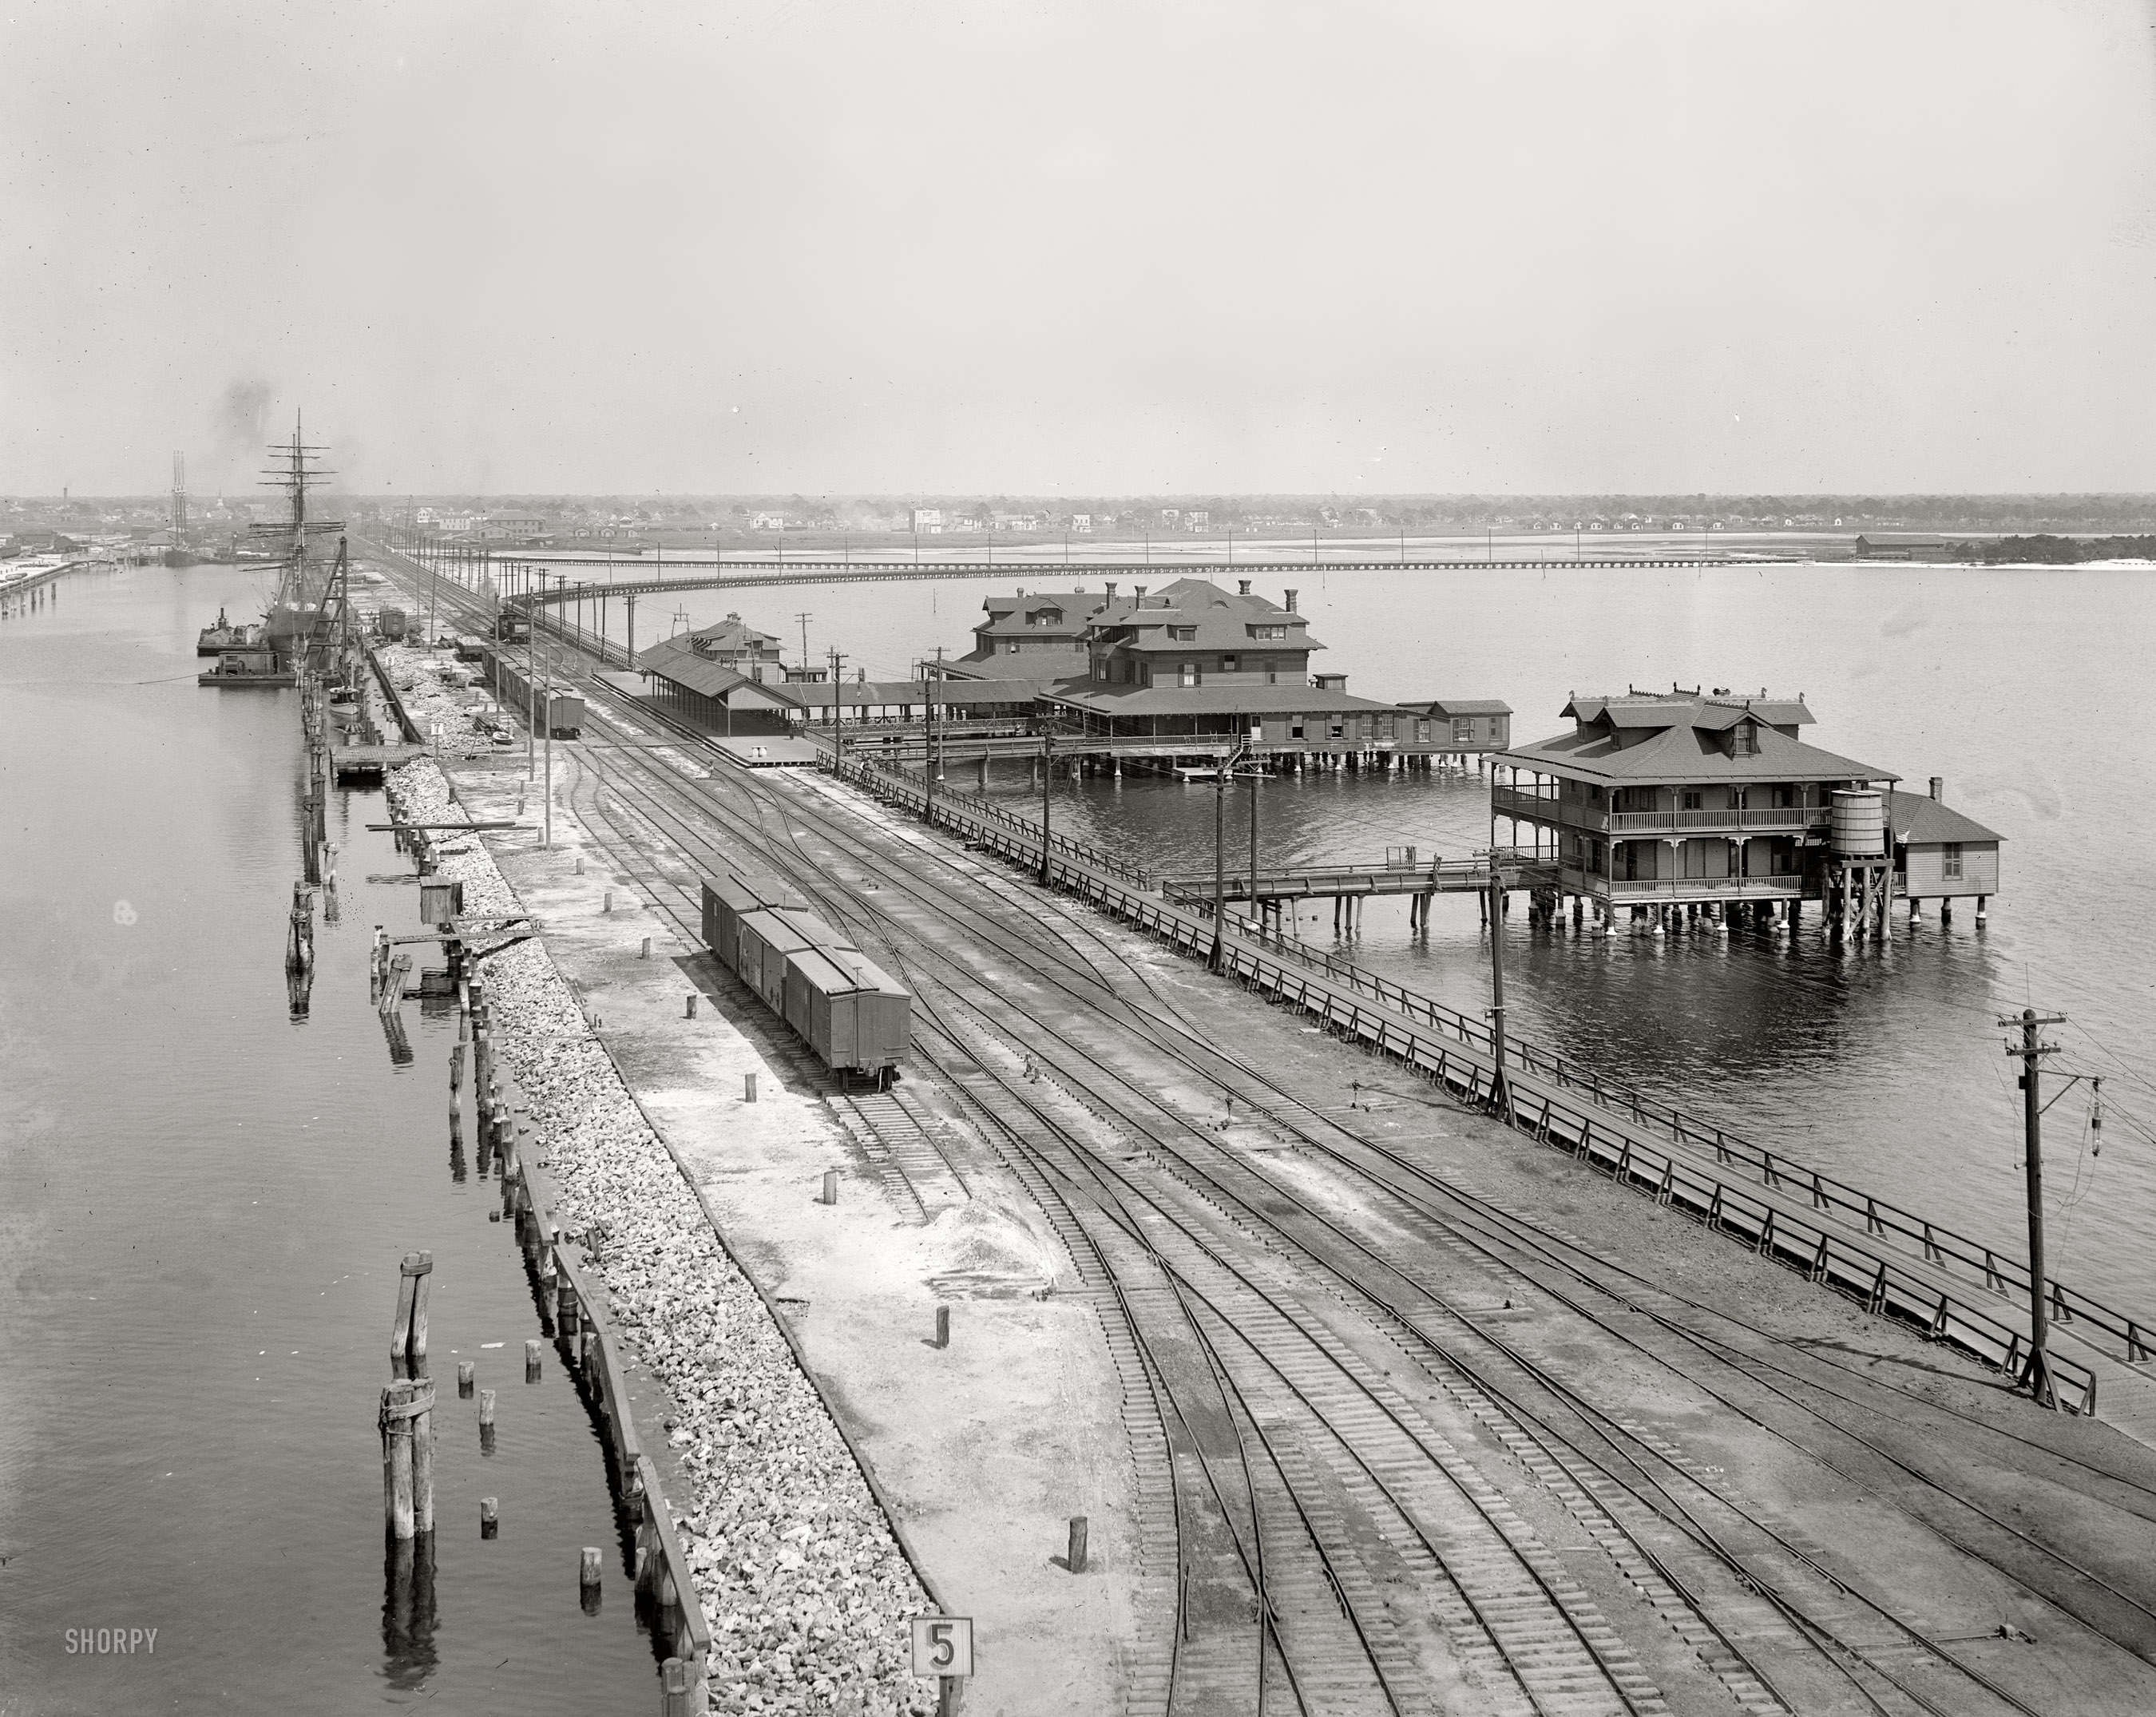 Another look at Old Florida circa 1900. "Port Tampa Inn and docks." Detroit Publishing Company glass negative. View full size.